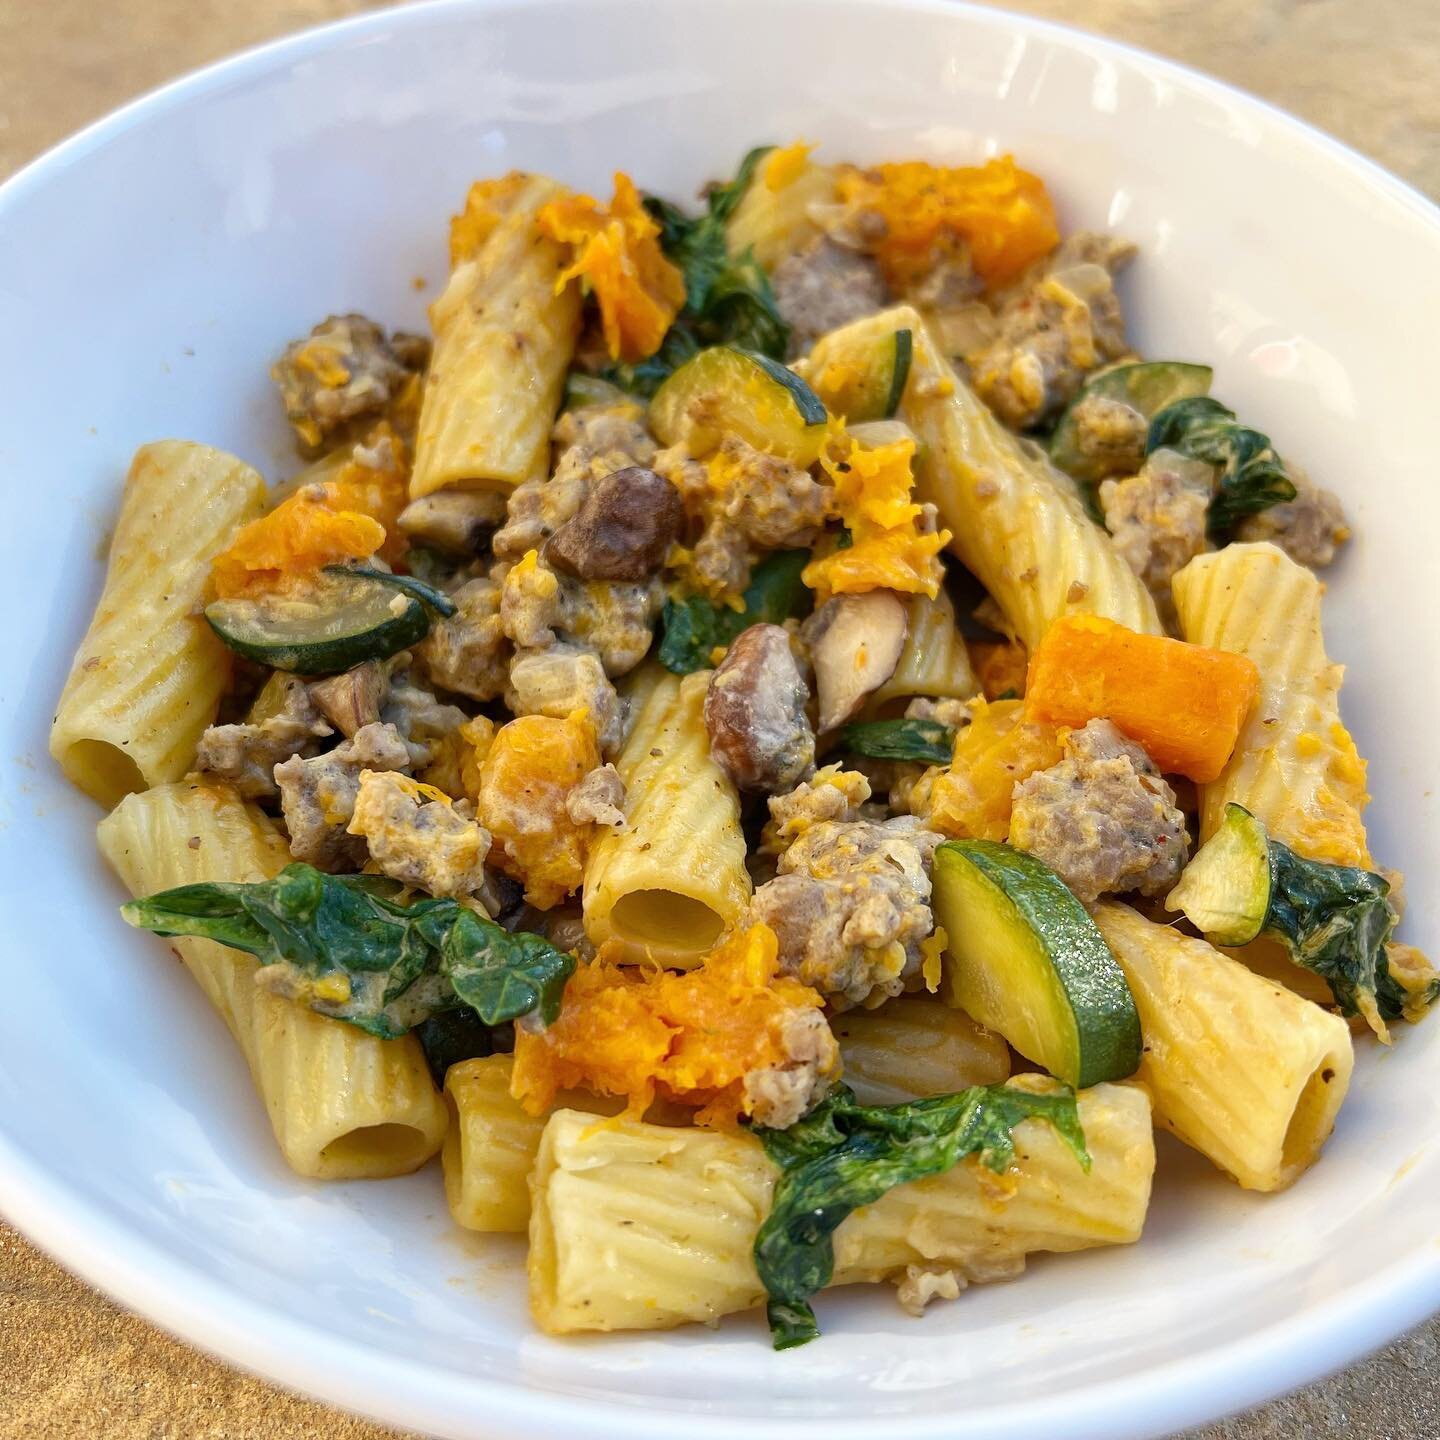 My new favorite Autumn time meal prep! 
Butternut Squash and Sausage Pasta 😍
🍁🍁🍁
INGREDIENTS
1 lb. Ground (sage) Sausage
1 bag/box of precut butternut squash cubes
1/2 cup chopped onions 
2 Zucchinis (sliced)
1/2 cup Mushrooms (sliced) 
1 cup Alf